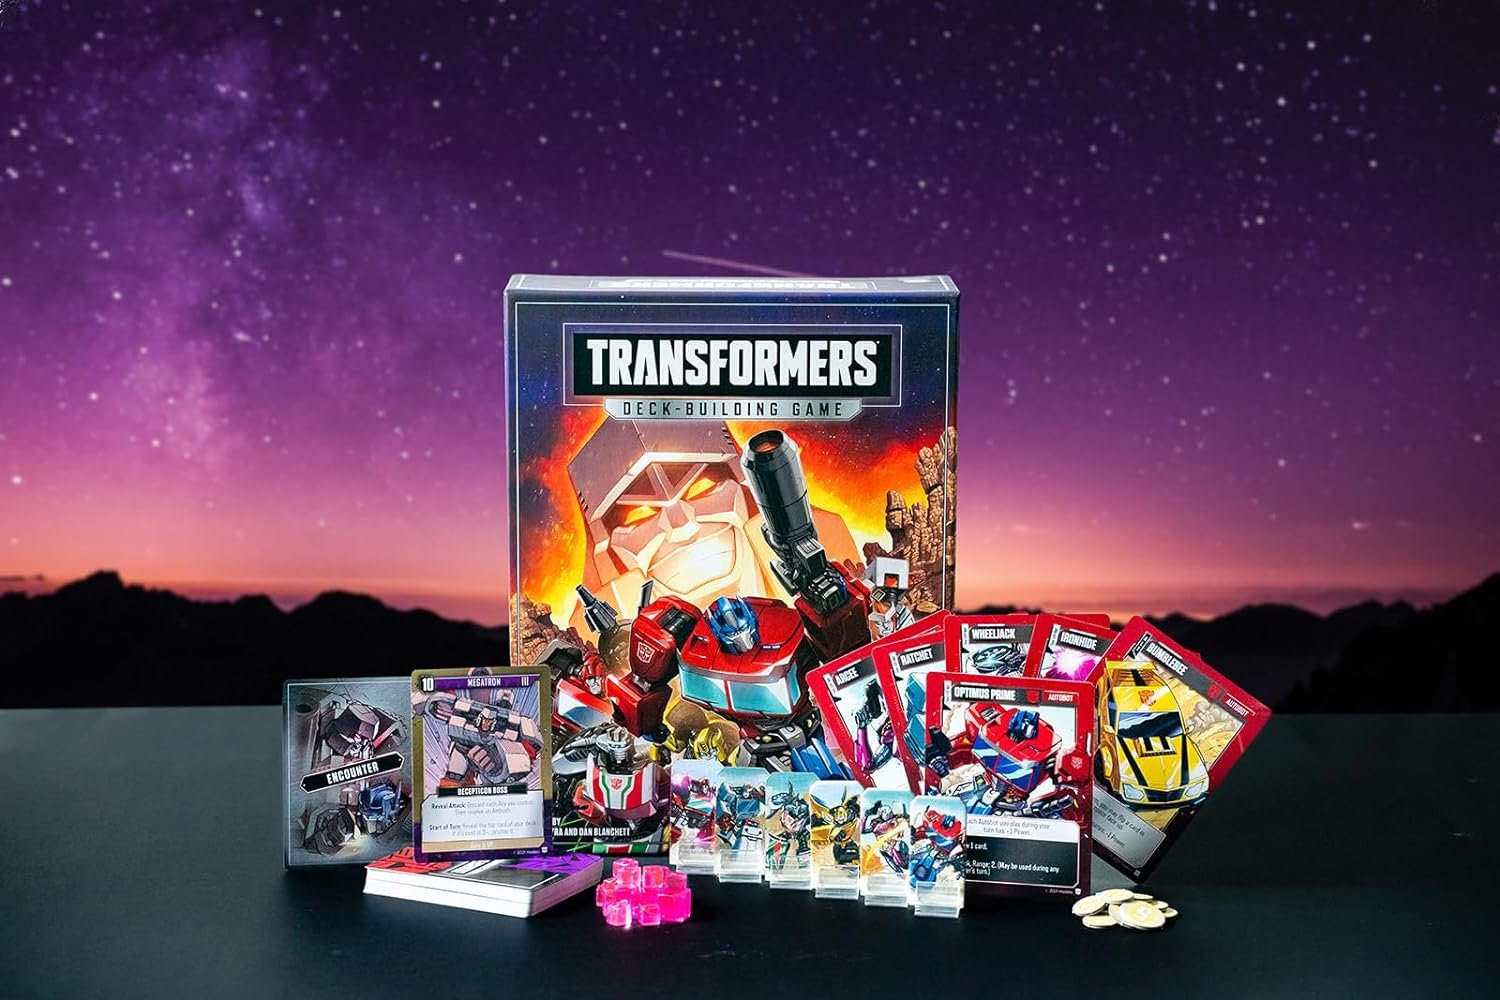 Renegade Game Studios Transformers Deck-Building Game 1-5 Players Ages 13+ to Enjoy in 45-90 min. Play competitively or as a Solo/Cooperative Game